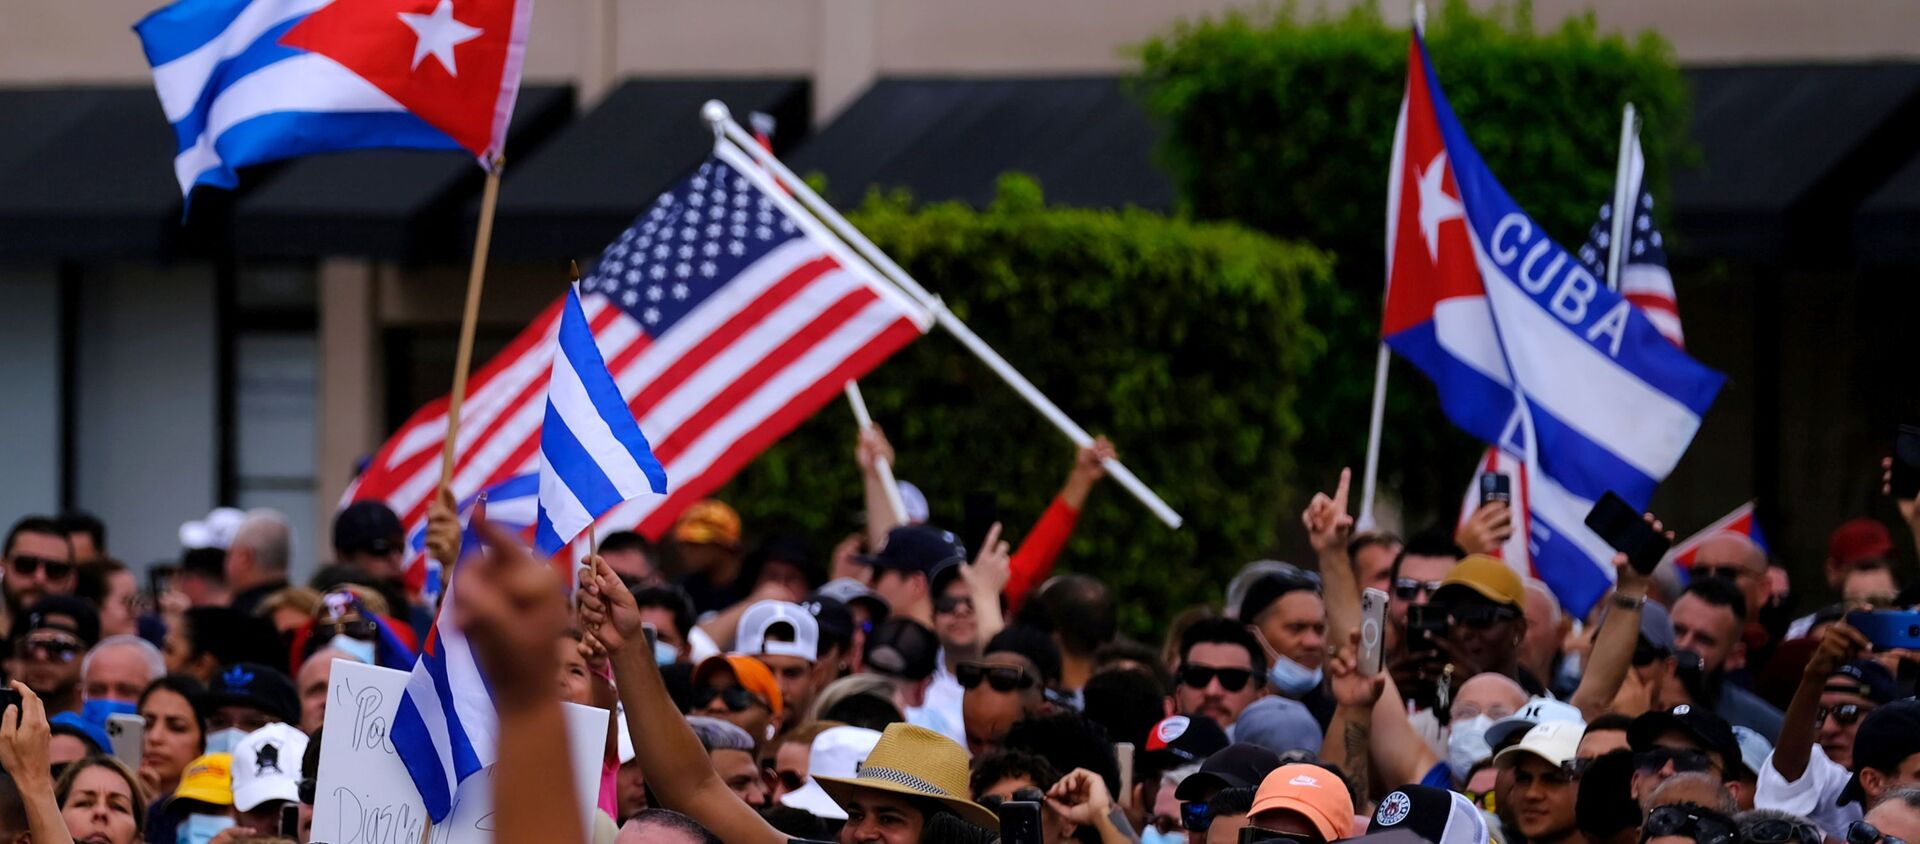 Emigres in Little Havana wave American and Cuban flags as they react to reports of protests in Cuba against the deteriorating economy, in Miami, Florida, U.S., July 11, 2021 - Sputnik Việt Nam, 1920, 21.07.2021